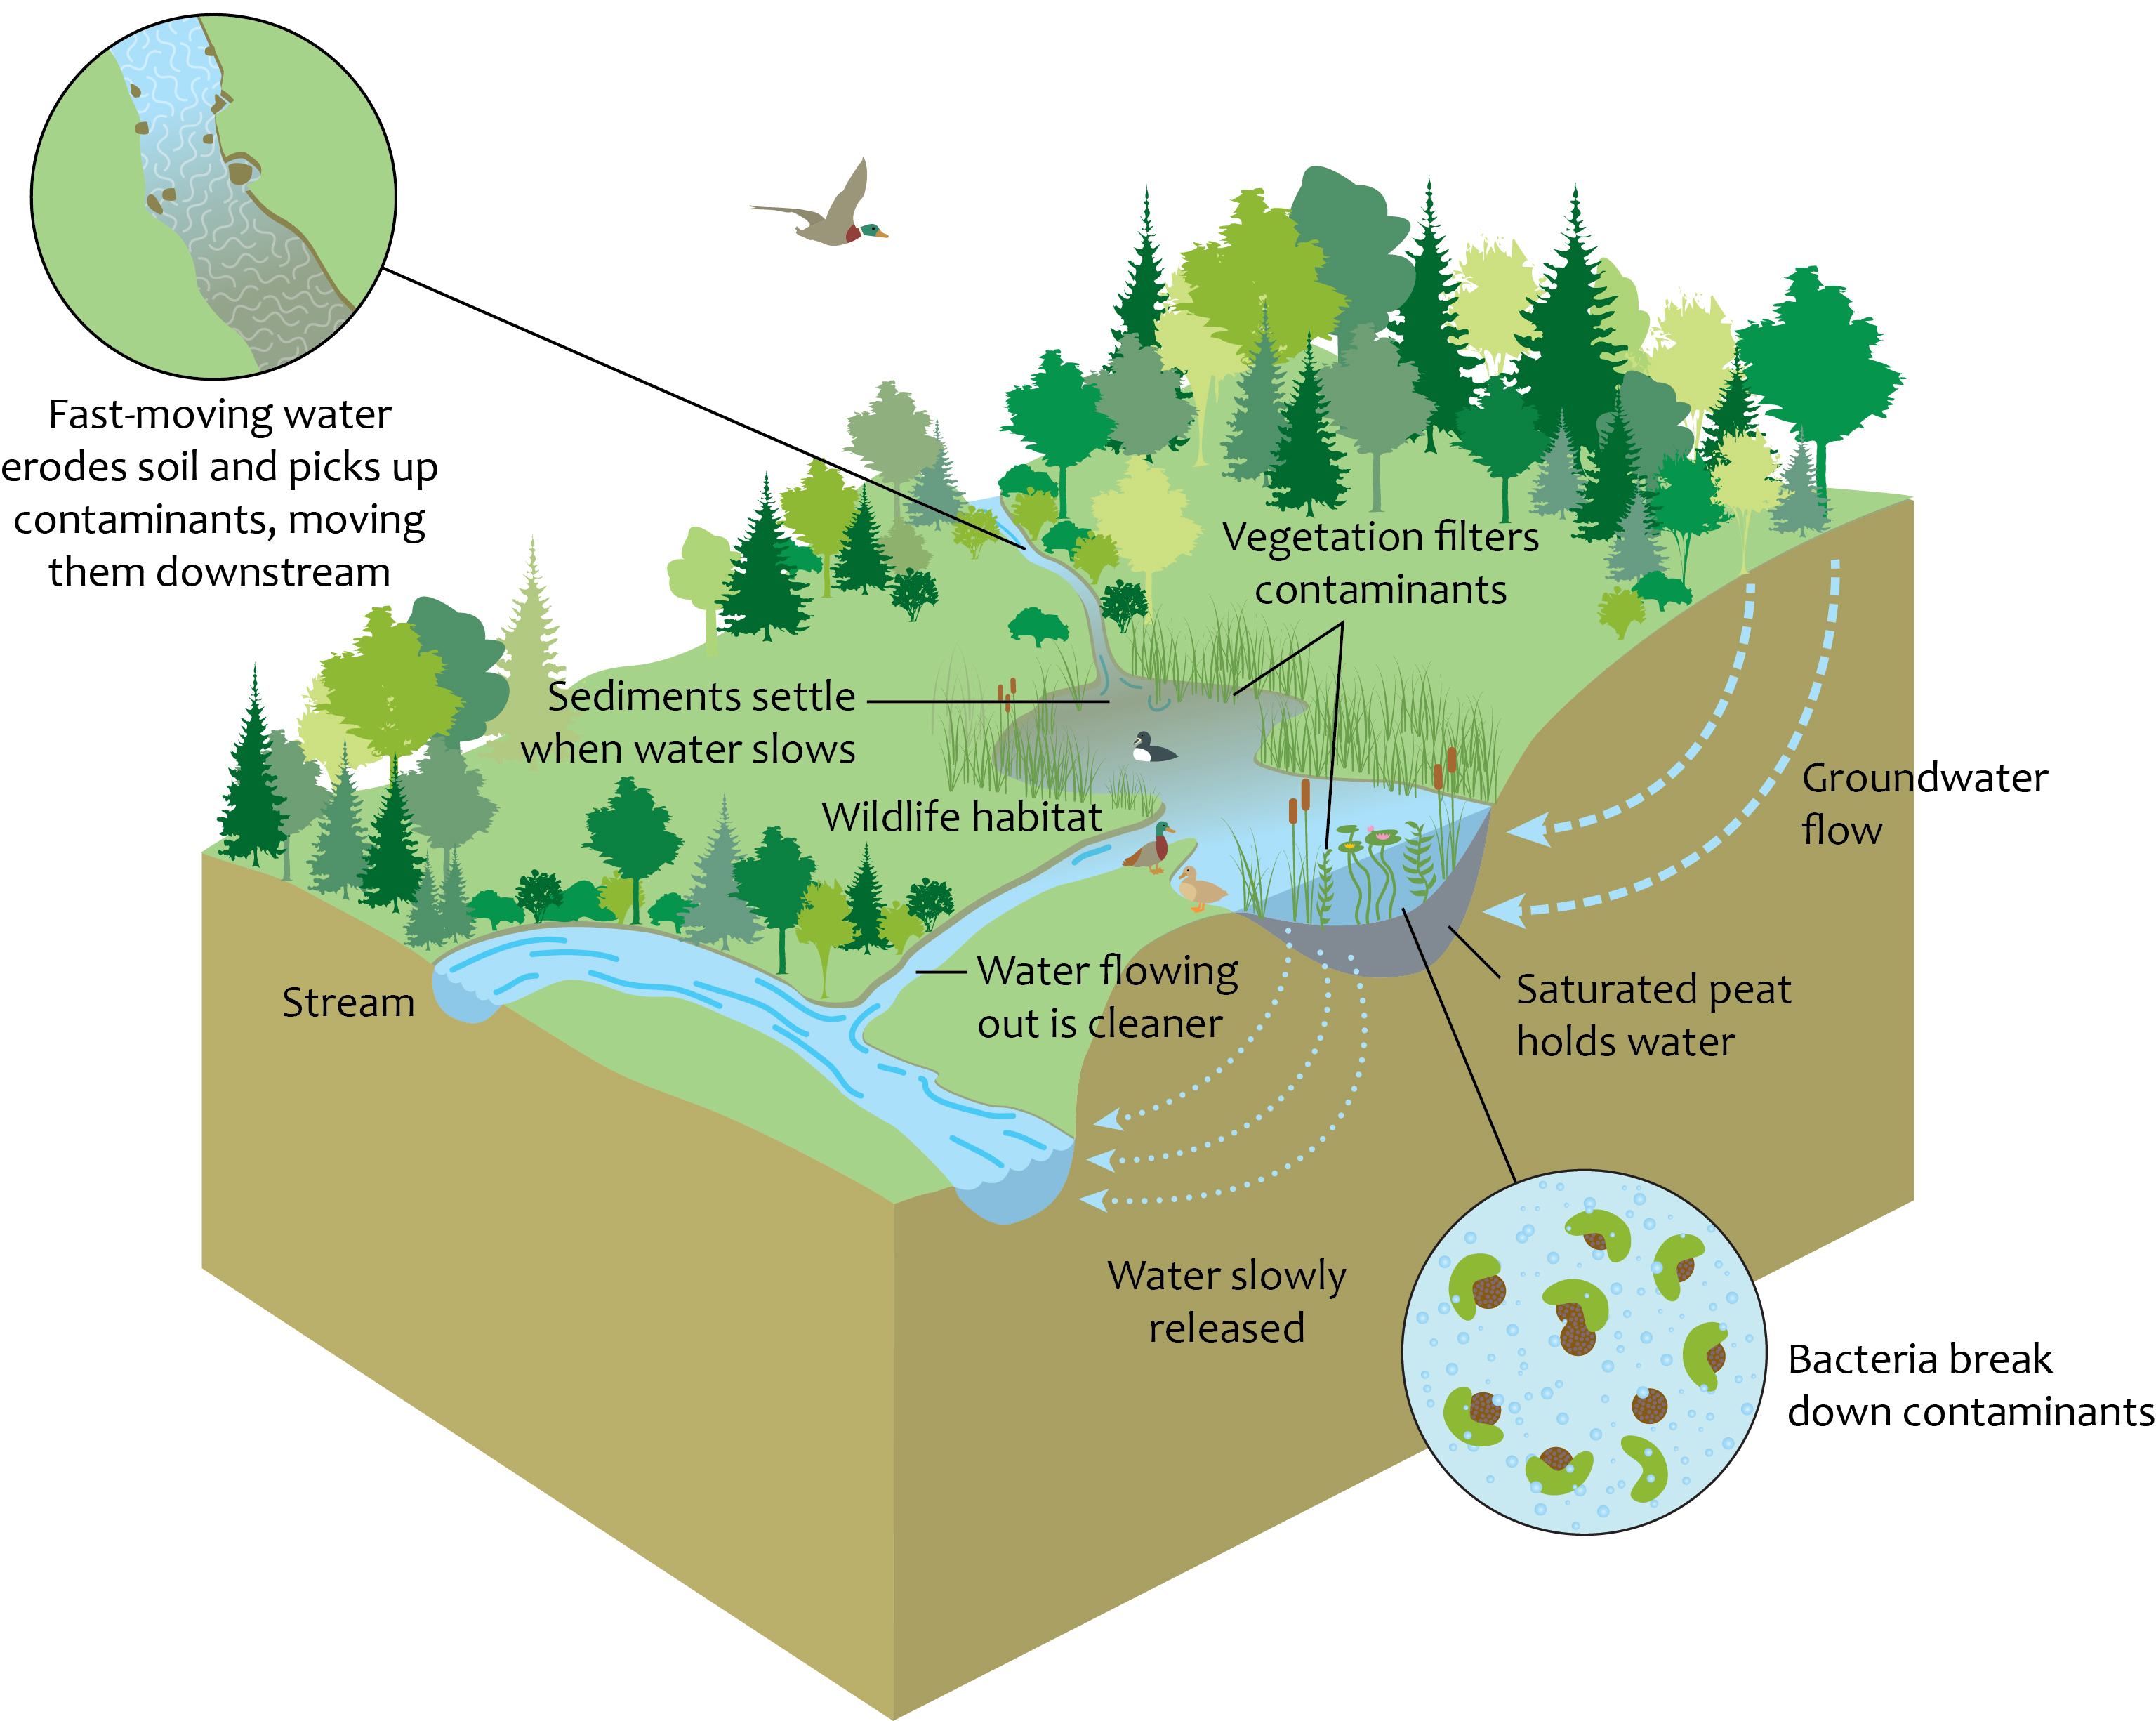 Diagram showing how wetlands function to clean water and regulate its flow. Fast-moving water picks up soil and contaminants, which drop when the water slows in the wetland. Plants and animals in the wetland filter out contaminants. Saturated peat beneath the wetland holds and slowly releases water.